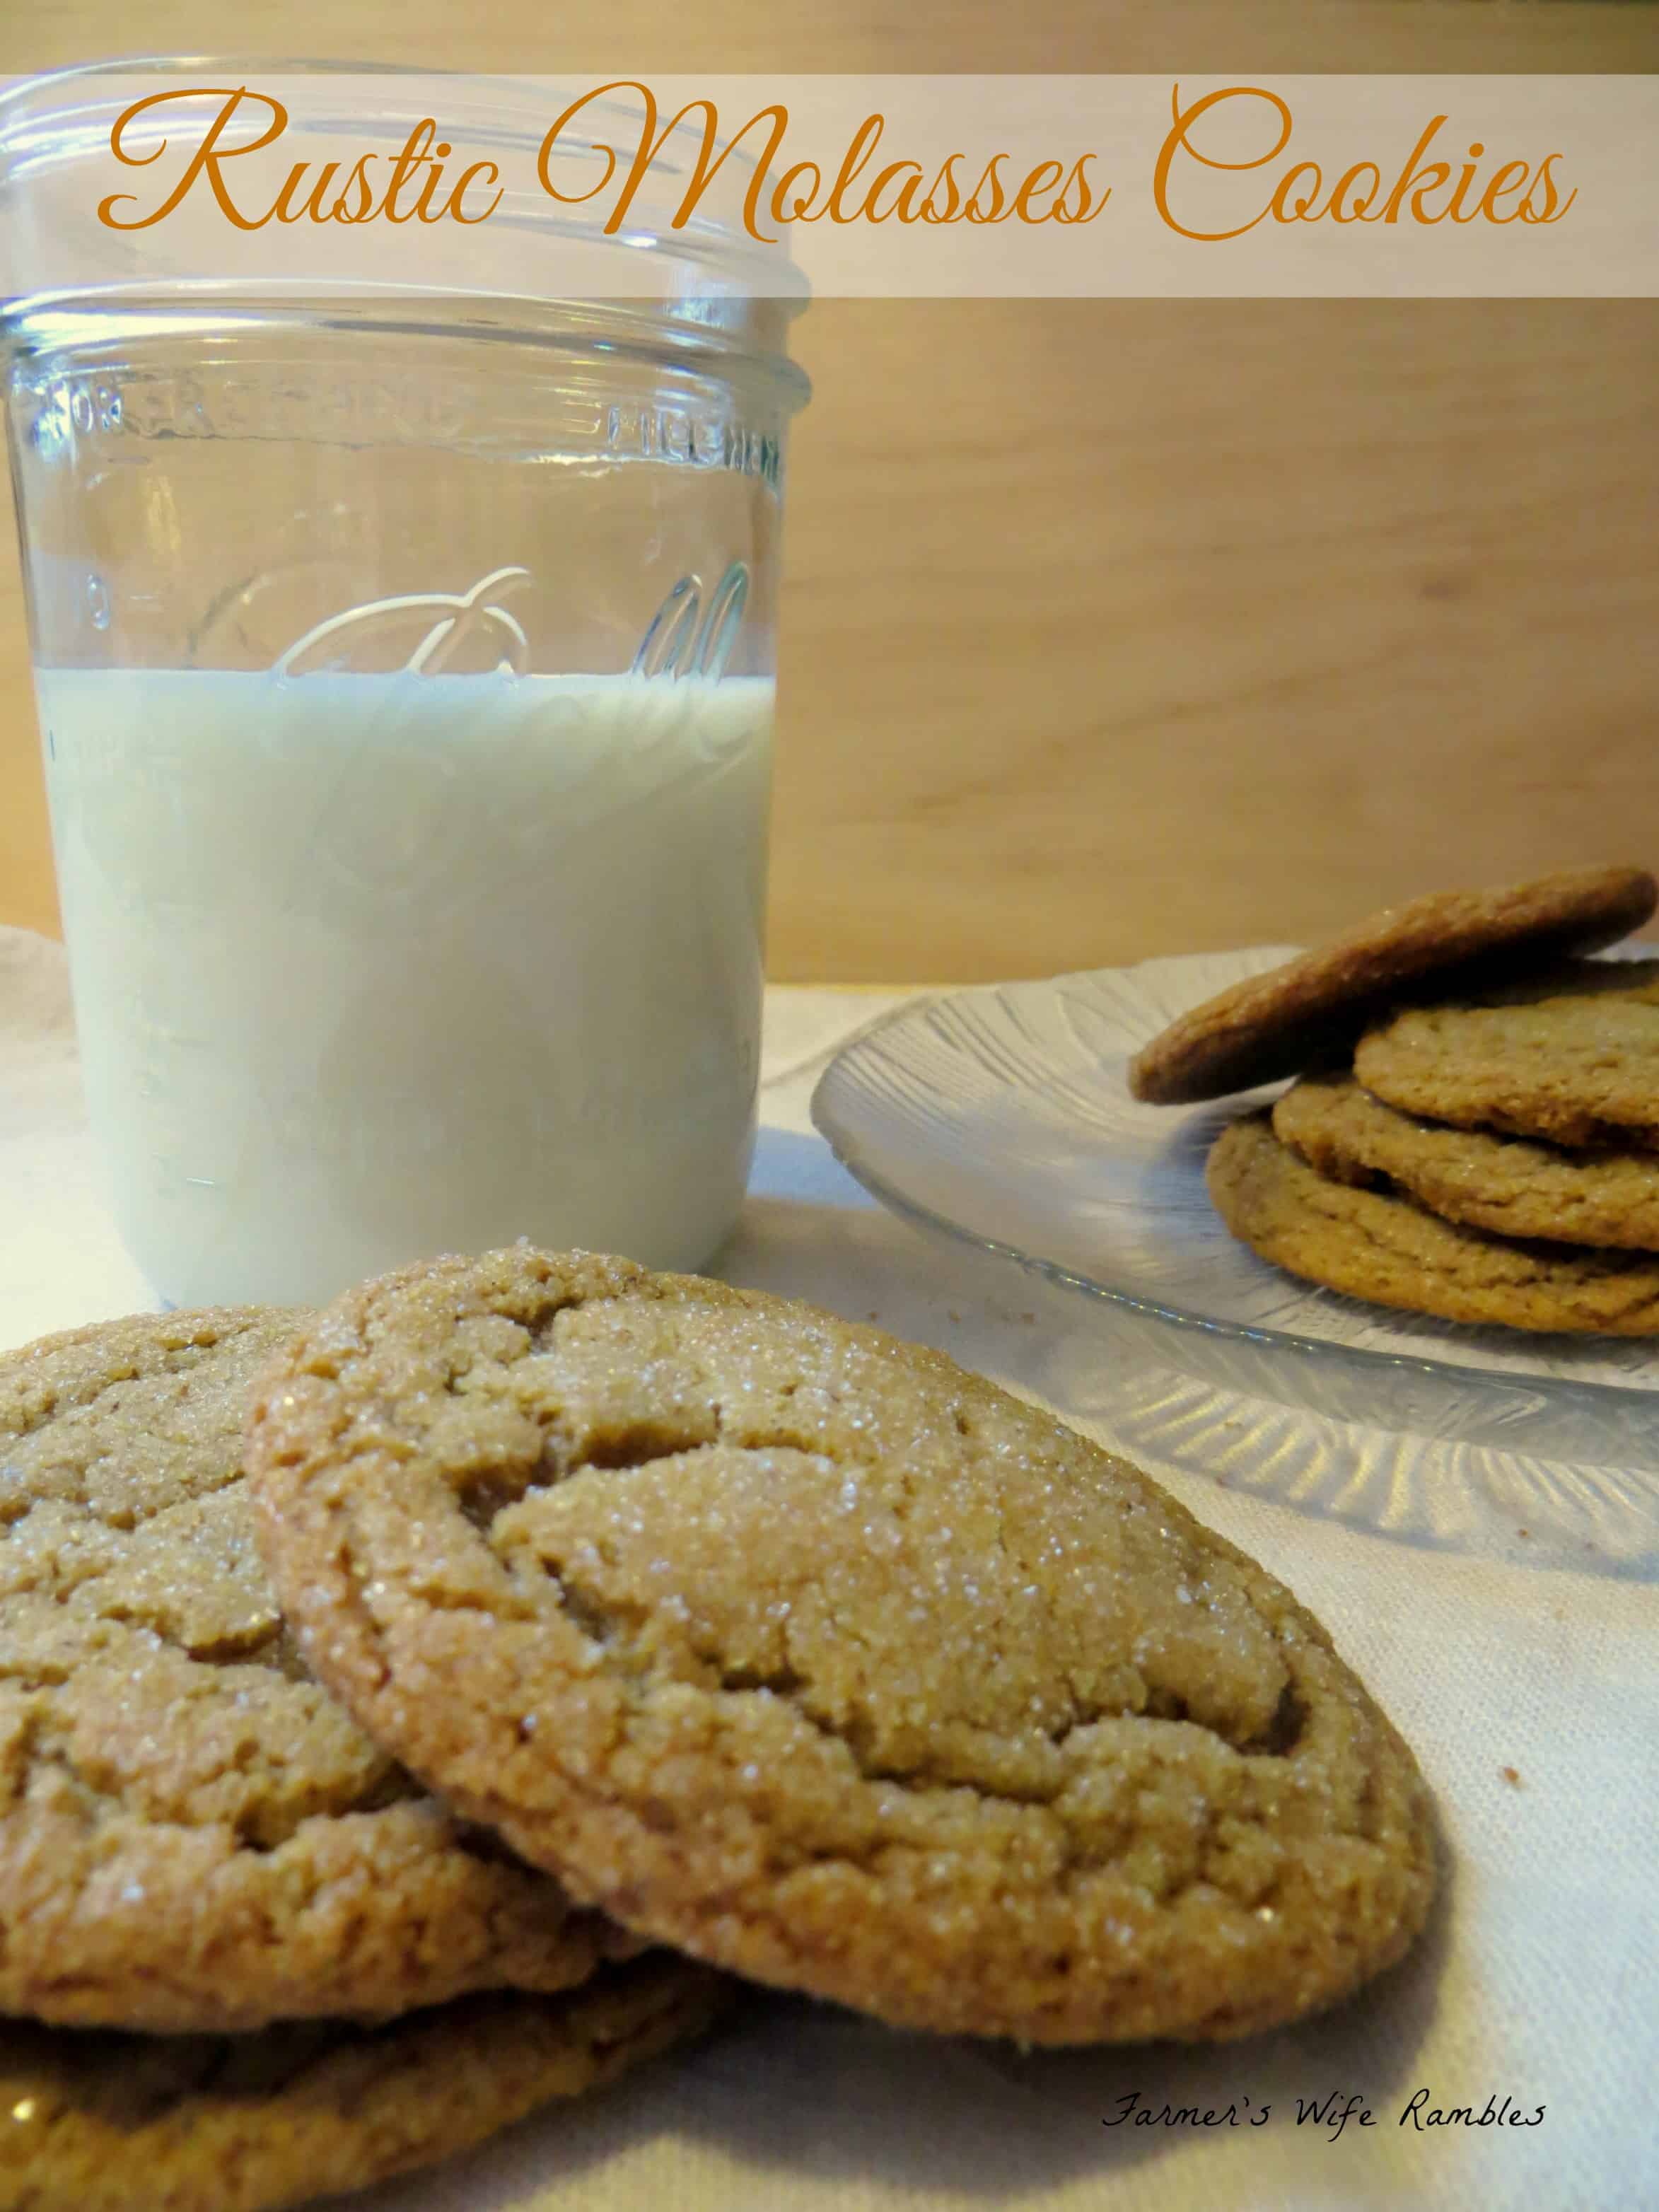 Rustic Molasses Cookies on a plate with a glass of milk in the background.